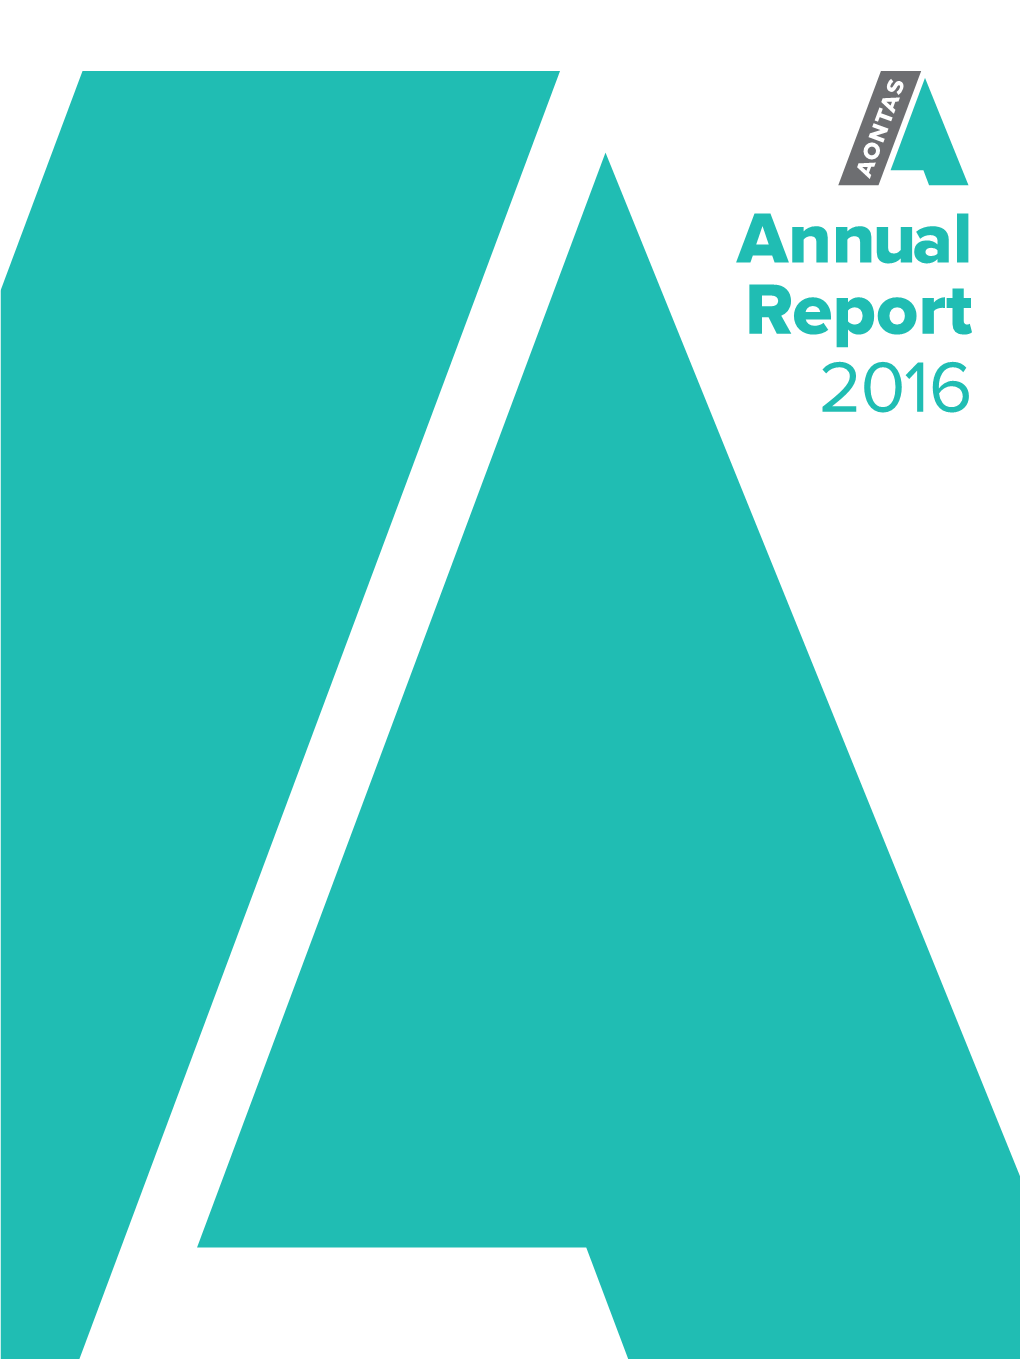 AONTAS Annual Report 2016